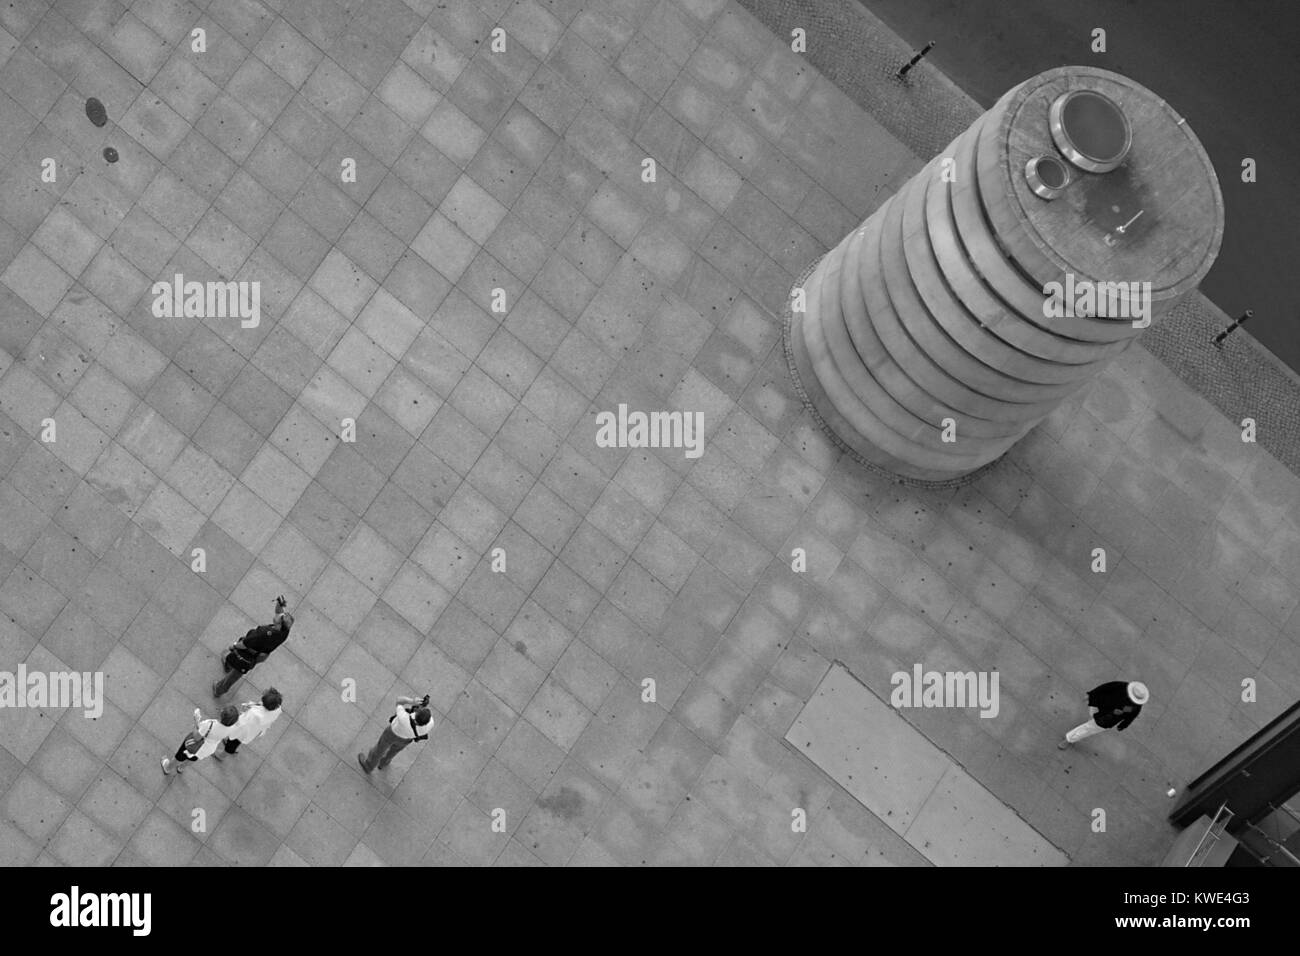 Some tourists in a Berlin street seen from above. Stock Photo